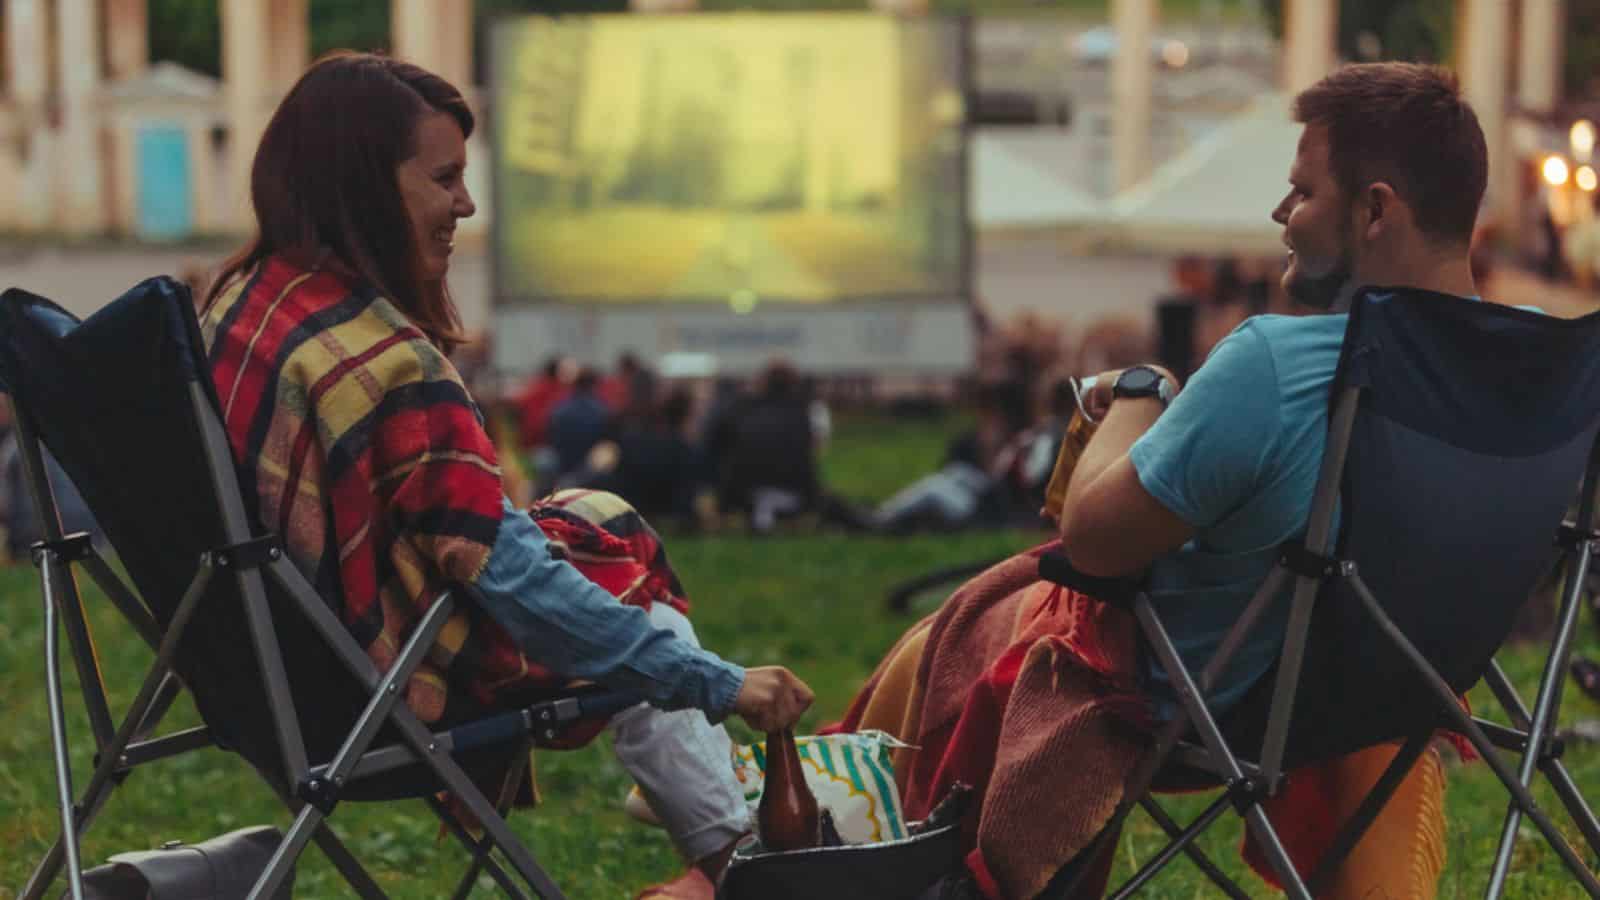 Couple sitting in camp-chairs in city park looking movie outdoors at open air cinema